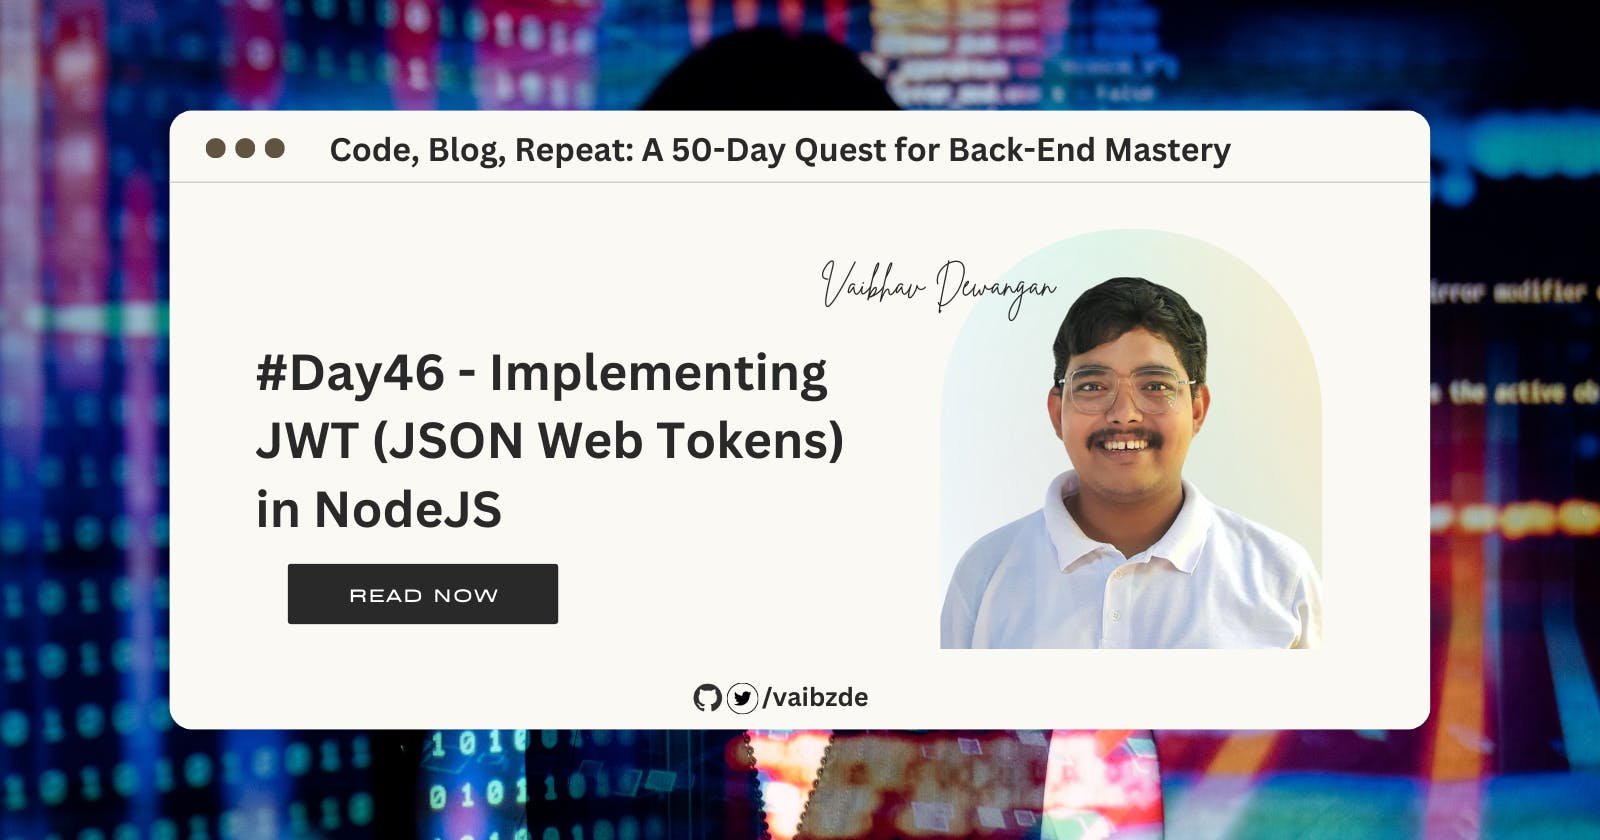 #Day46 - Implementing JWT (JSON Web Tokens) in NodeJS